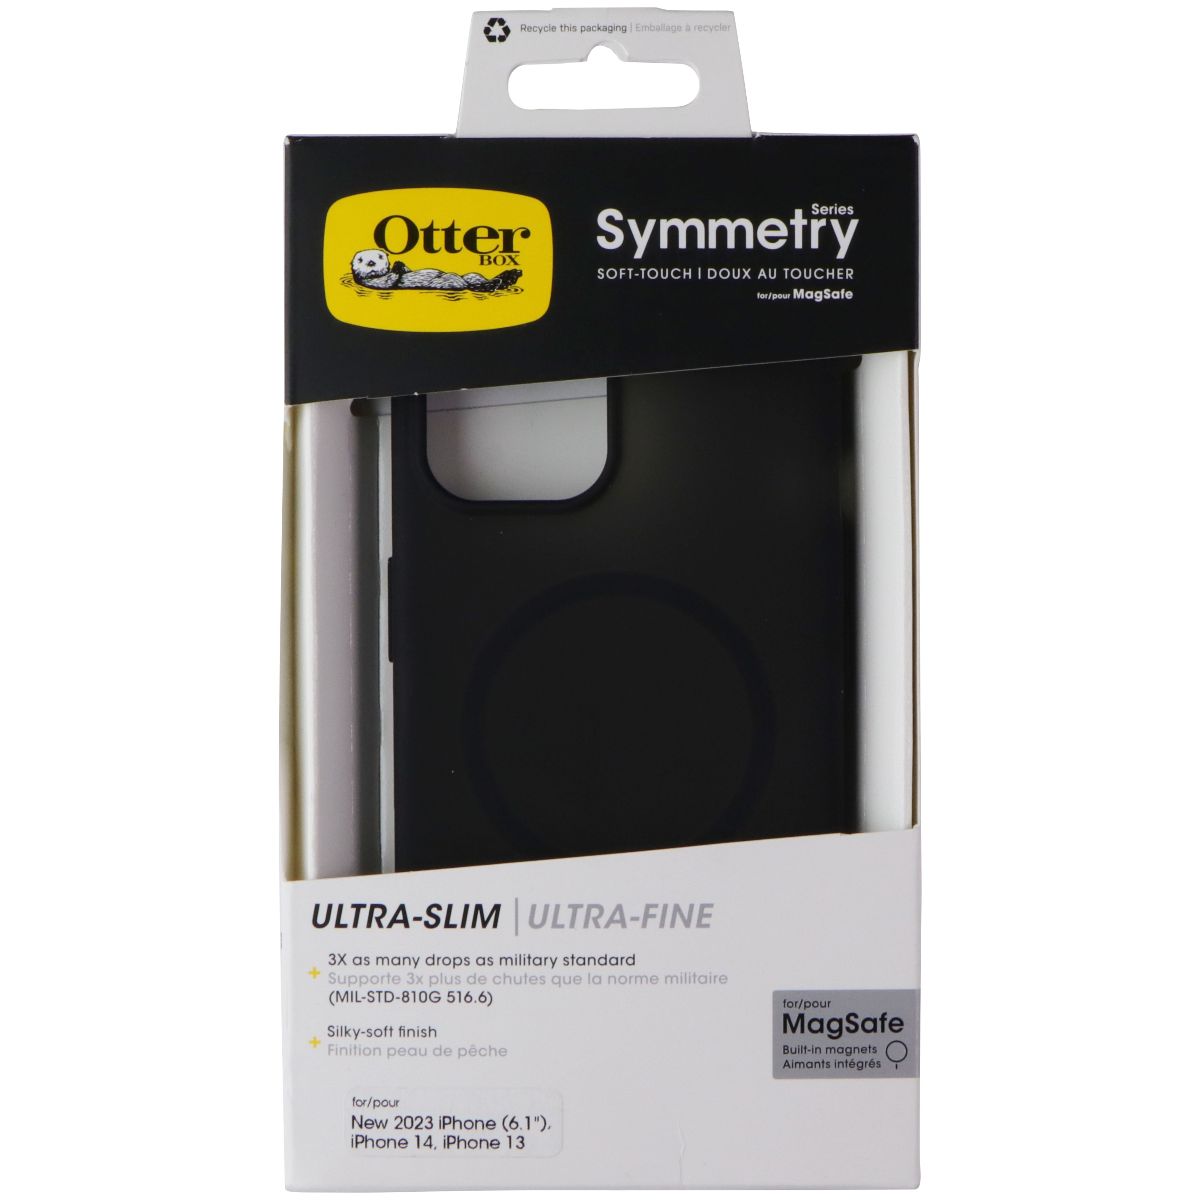 OtterBox Symmetry Soft Touch Case for MagSafe for iPhone 15/14/13 - Dark Echo